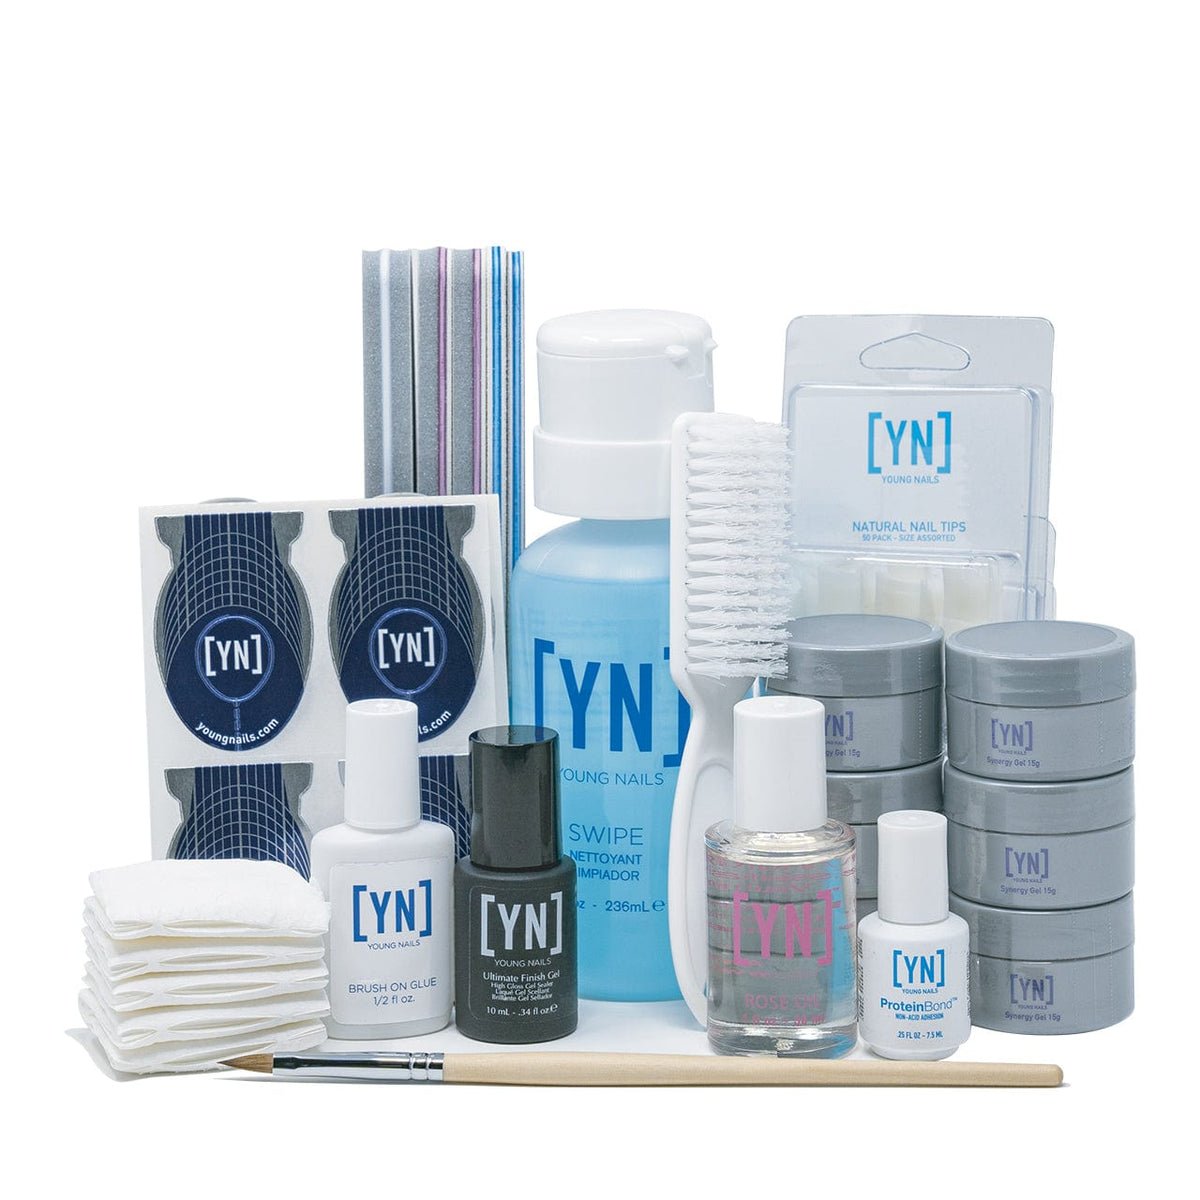 Pro Gel Kit Nails - Young Nails - Luxe Pacifique